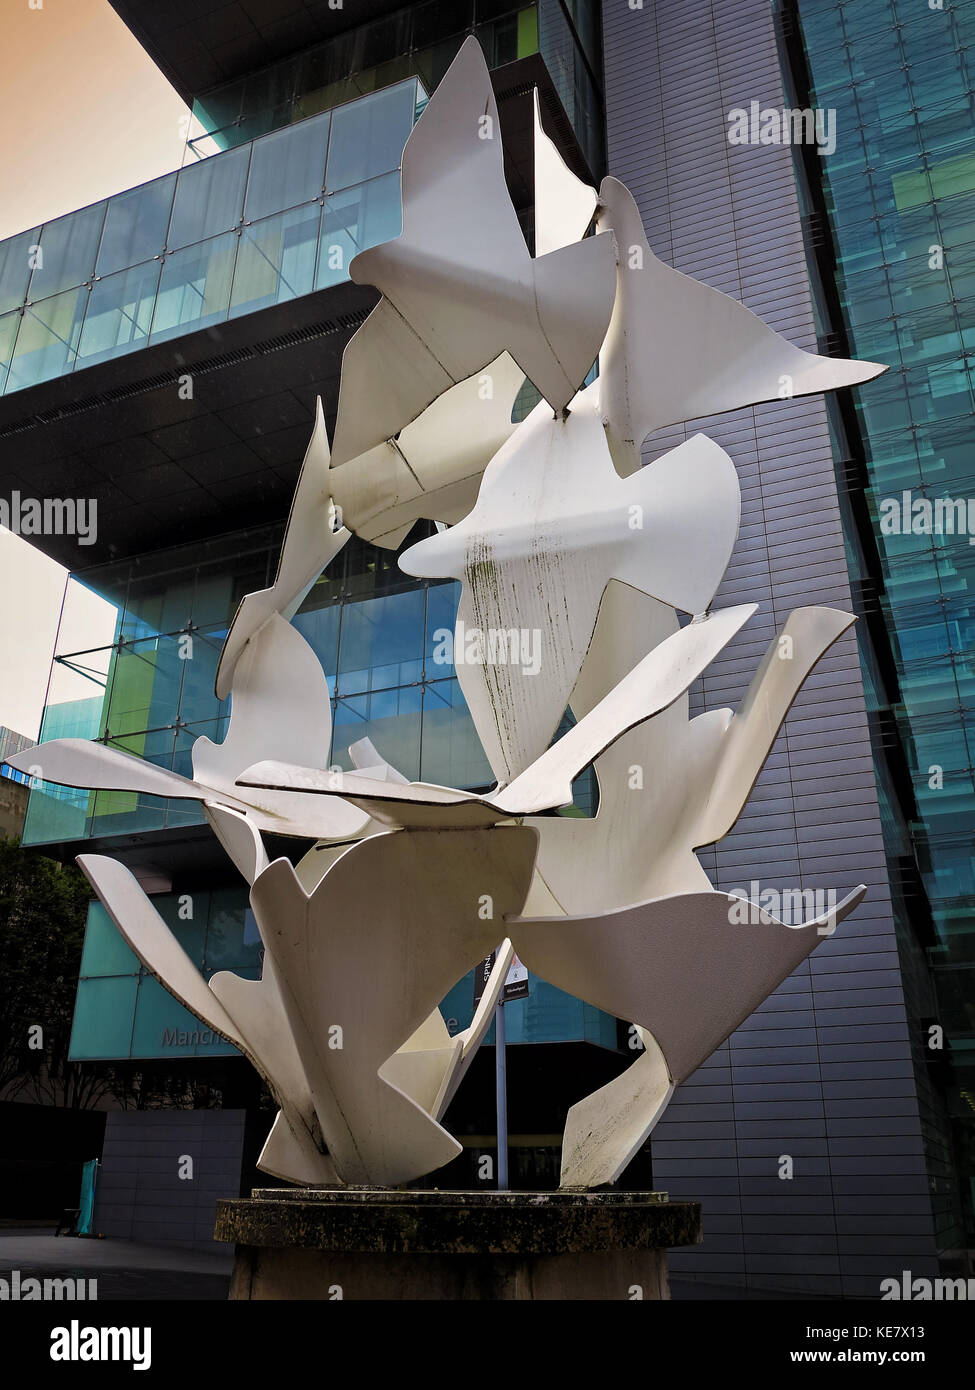 The complexity of justice is symbolised by this juxtaposition of the Doves of Peace sculpture and the Civil Justice Centre at Spinningfields, Manchest Stock Photo